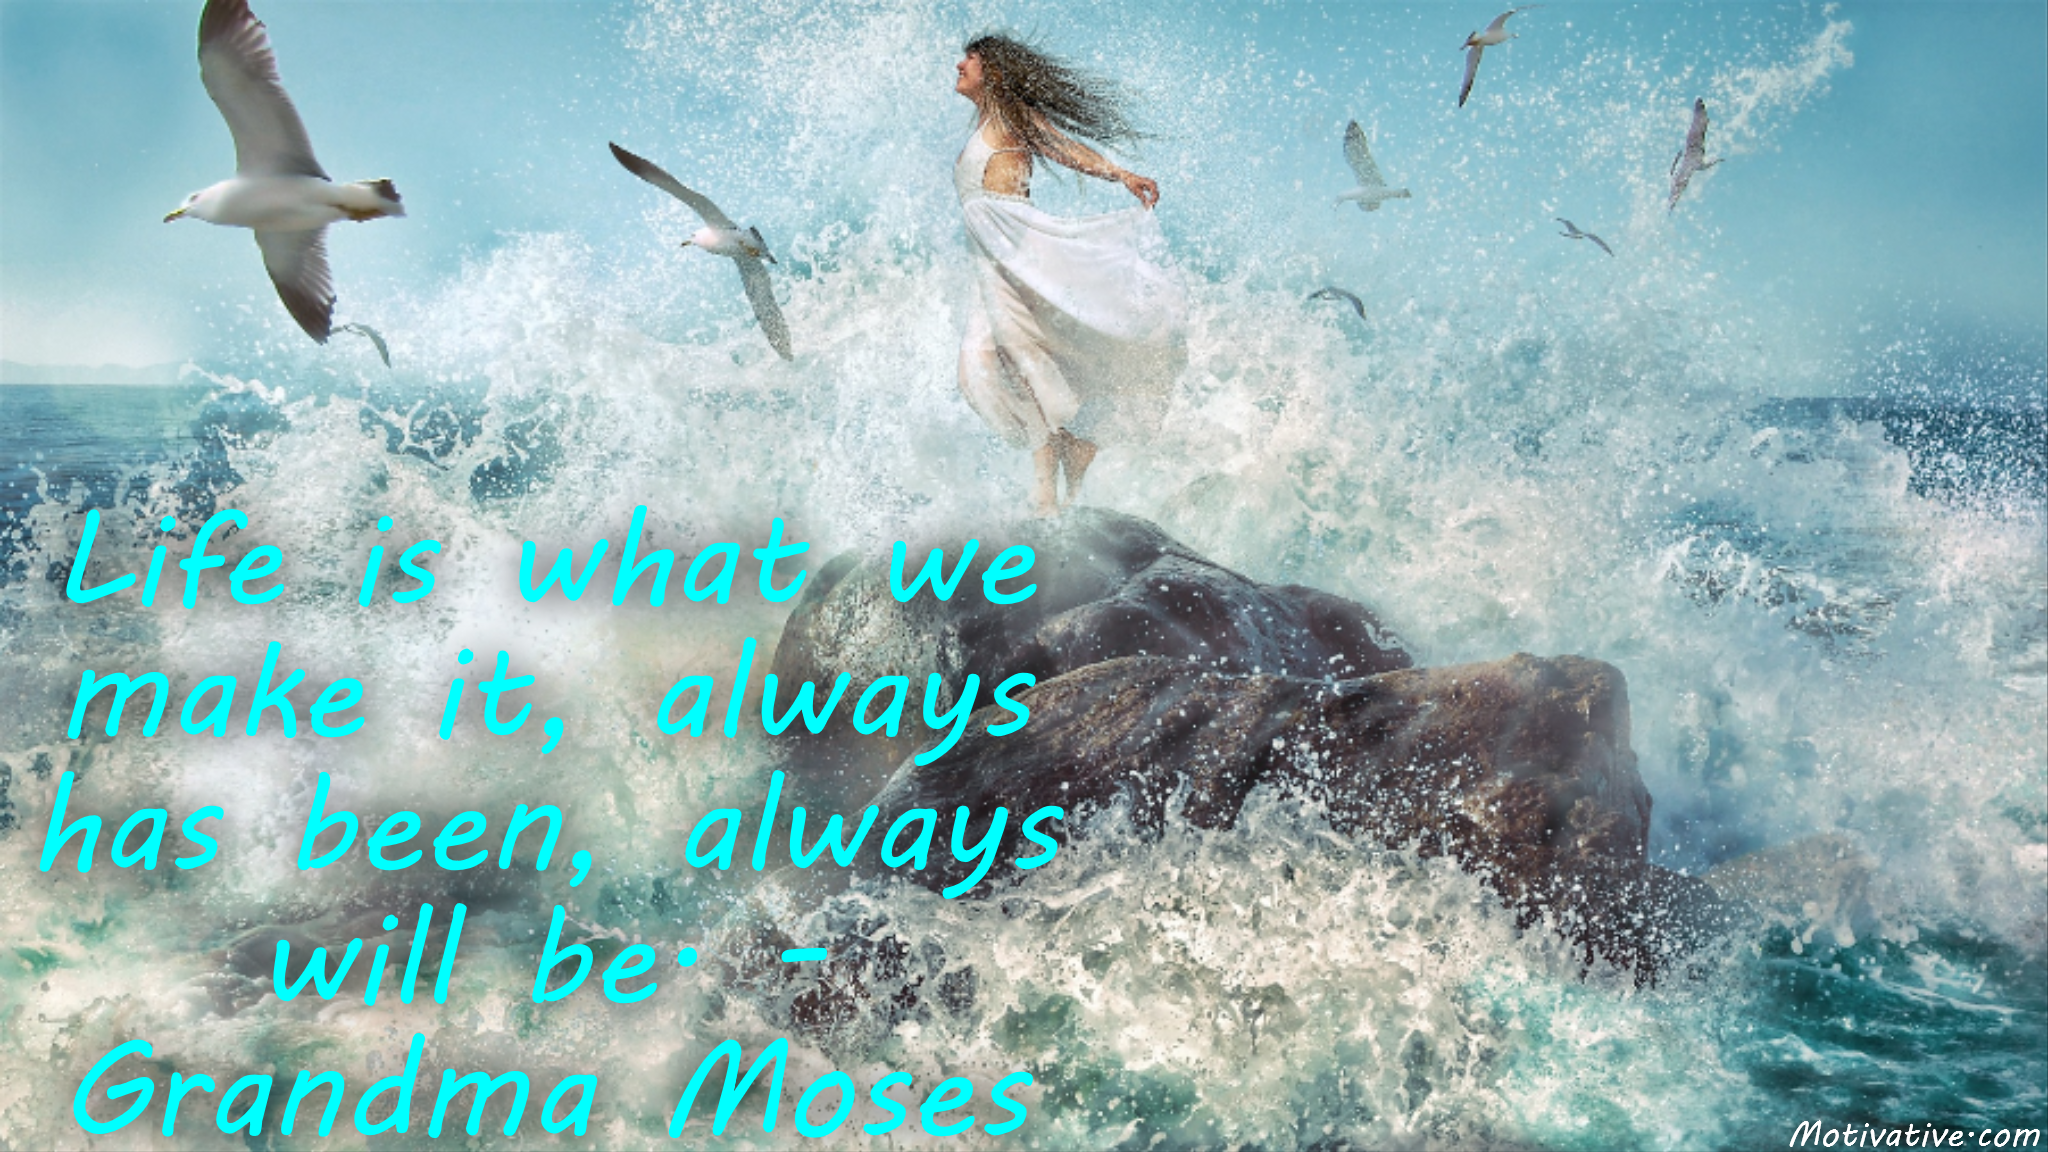 Life is what we make it, always has been, always will be. – Grandma Moses